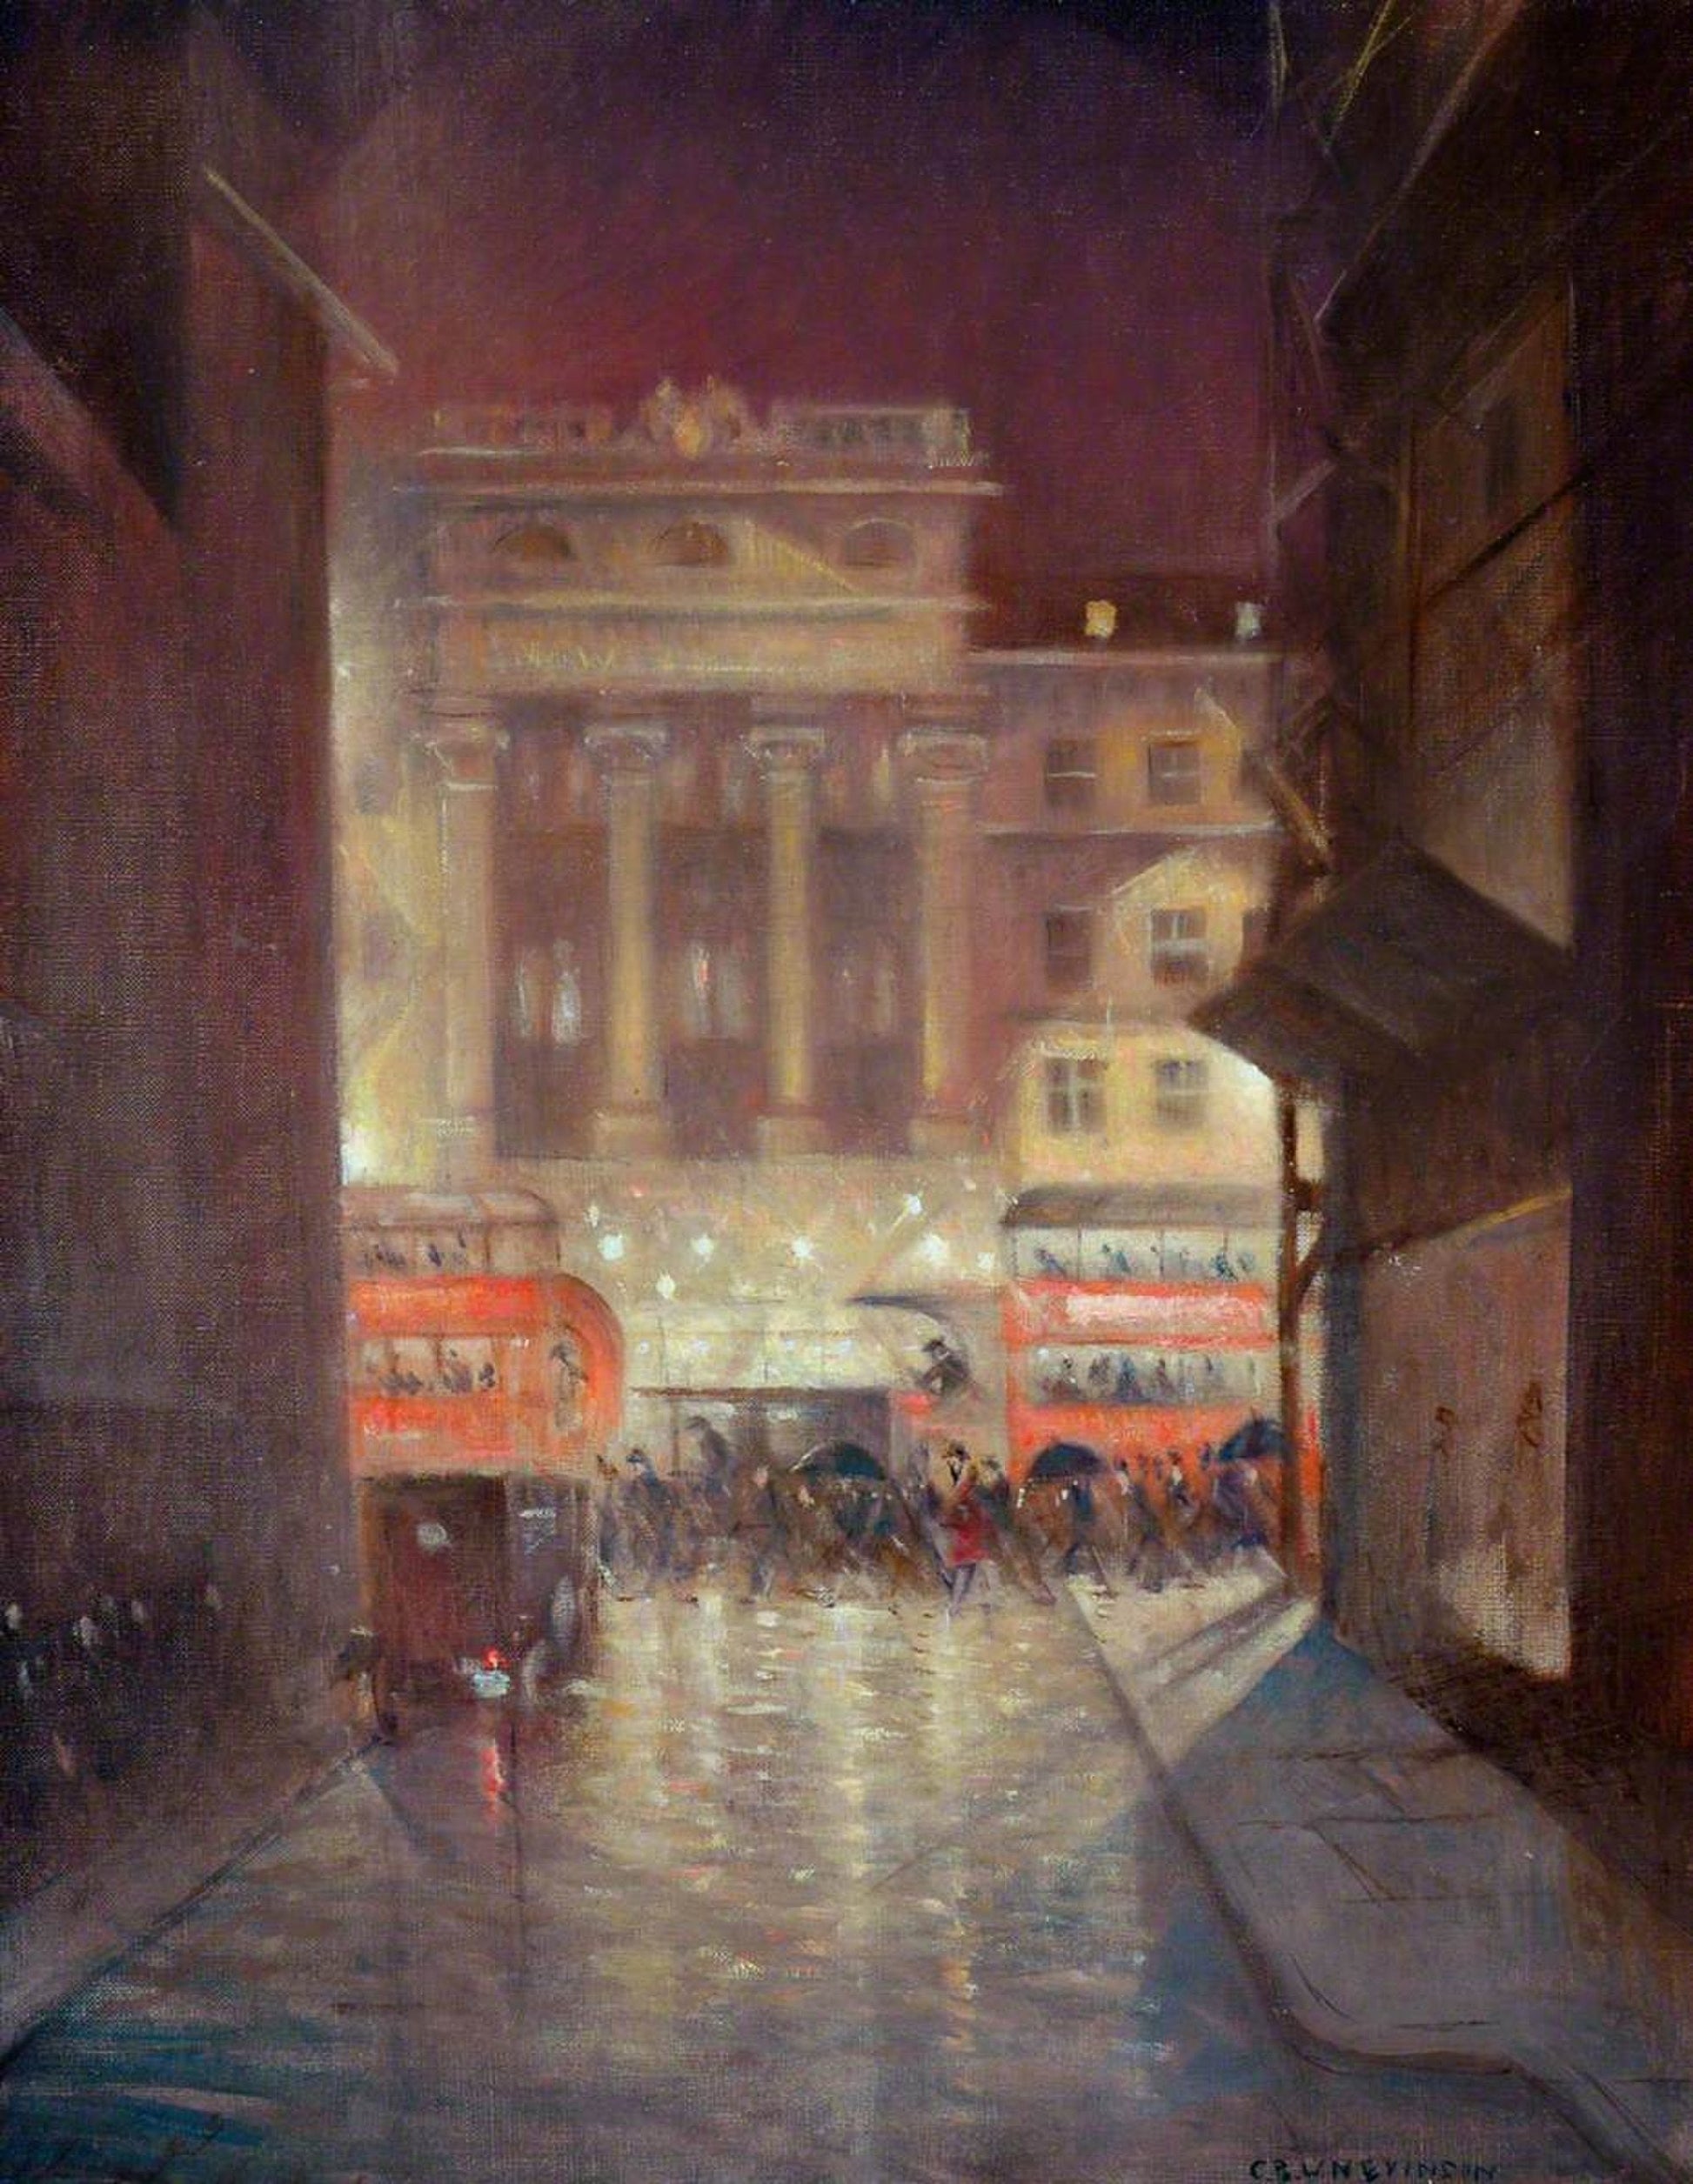 The Strand by Night (London, 1930s) | Christopher R. W. Nevinson prints Posters, Prints, & Visual Artwork The Trumpet Shop   